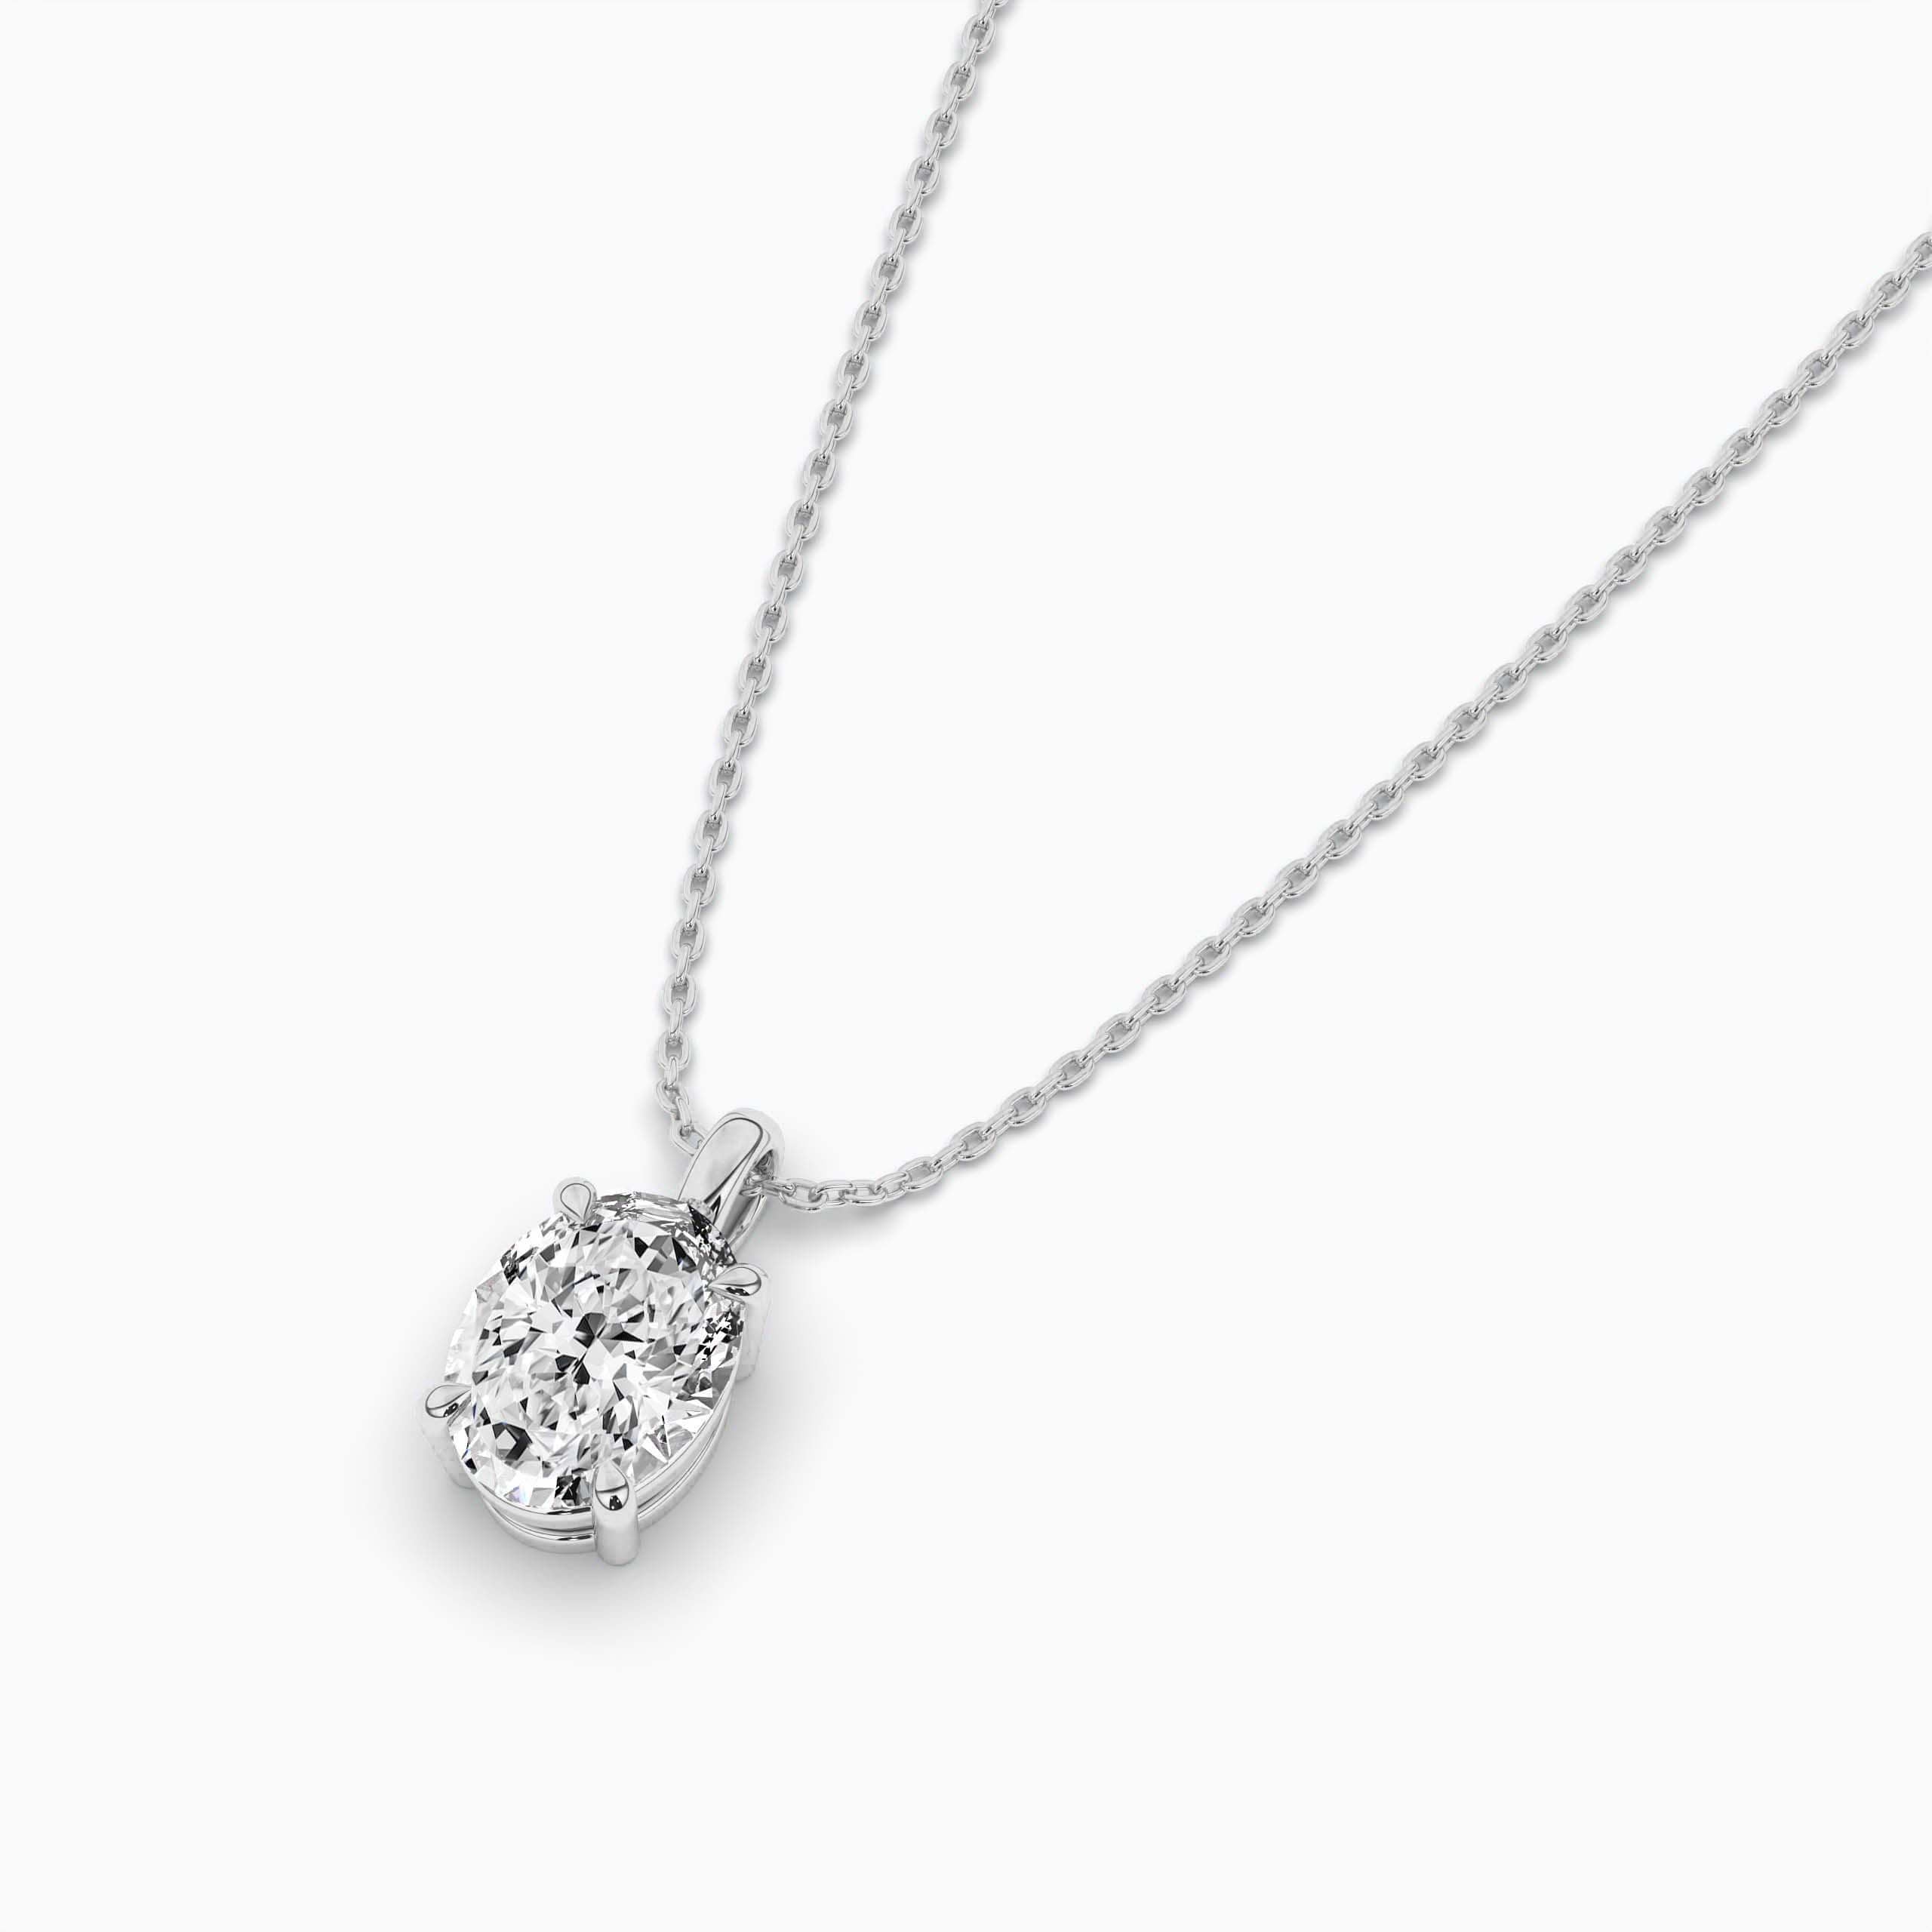 LAB GROWN CARAT OVAL SOLITAIRE DIAMOND PENDANT IN WHITE GOLD